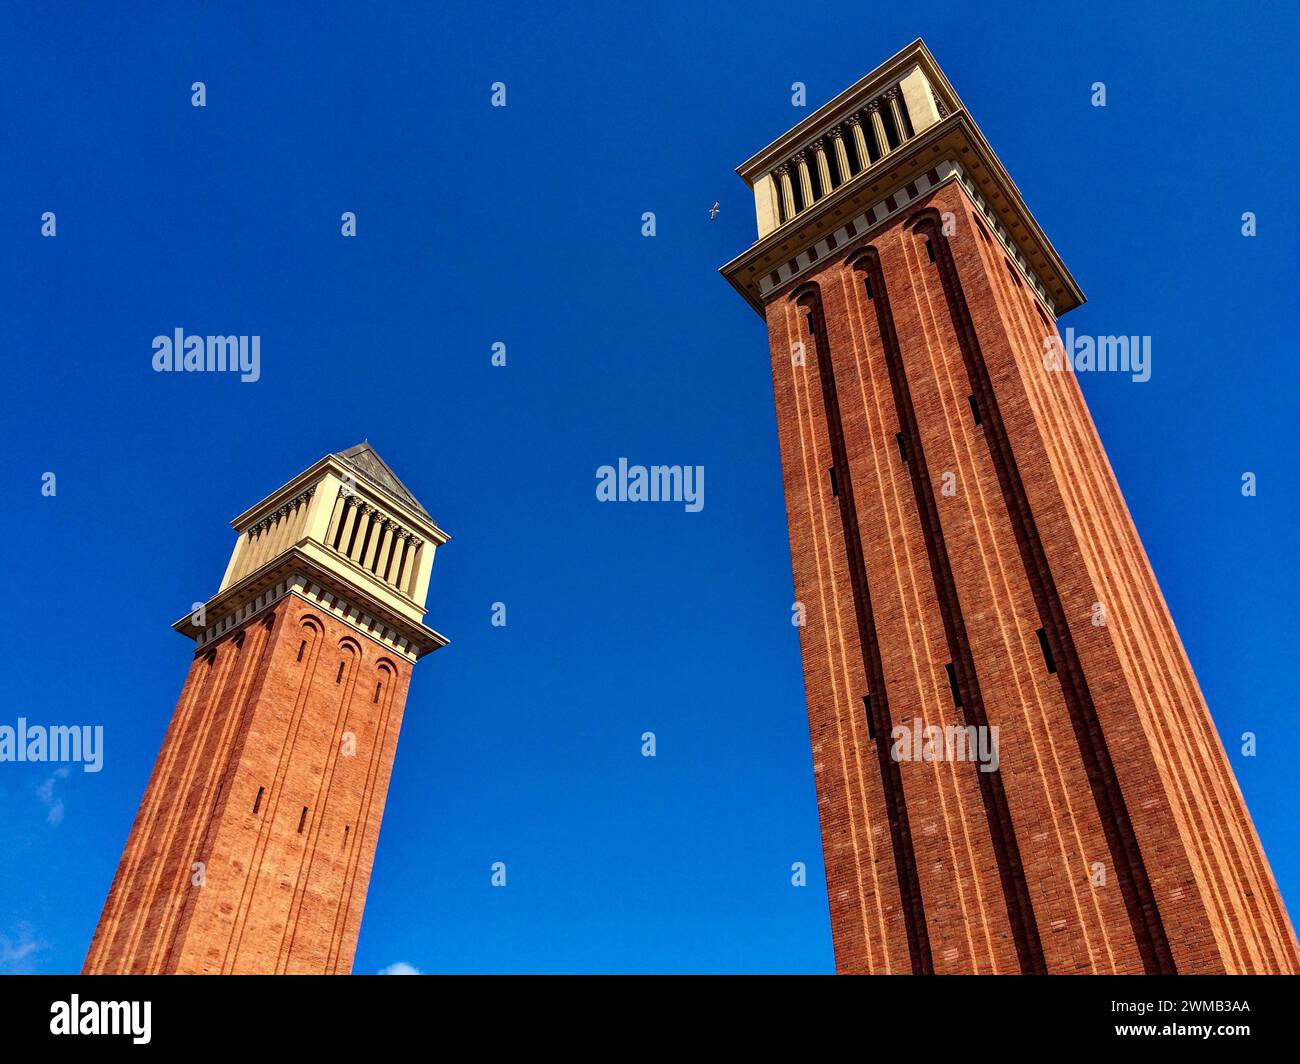 The image shows two tall red brick towers with white architectural details under a clear blue sky. Stock Photo